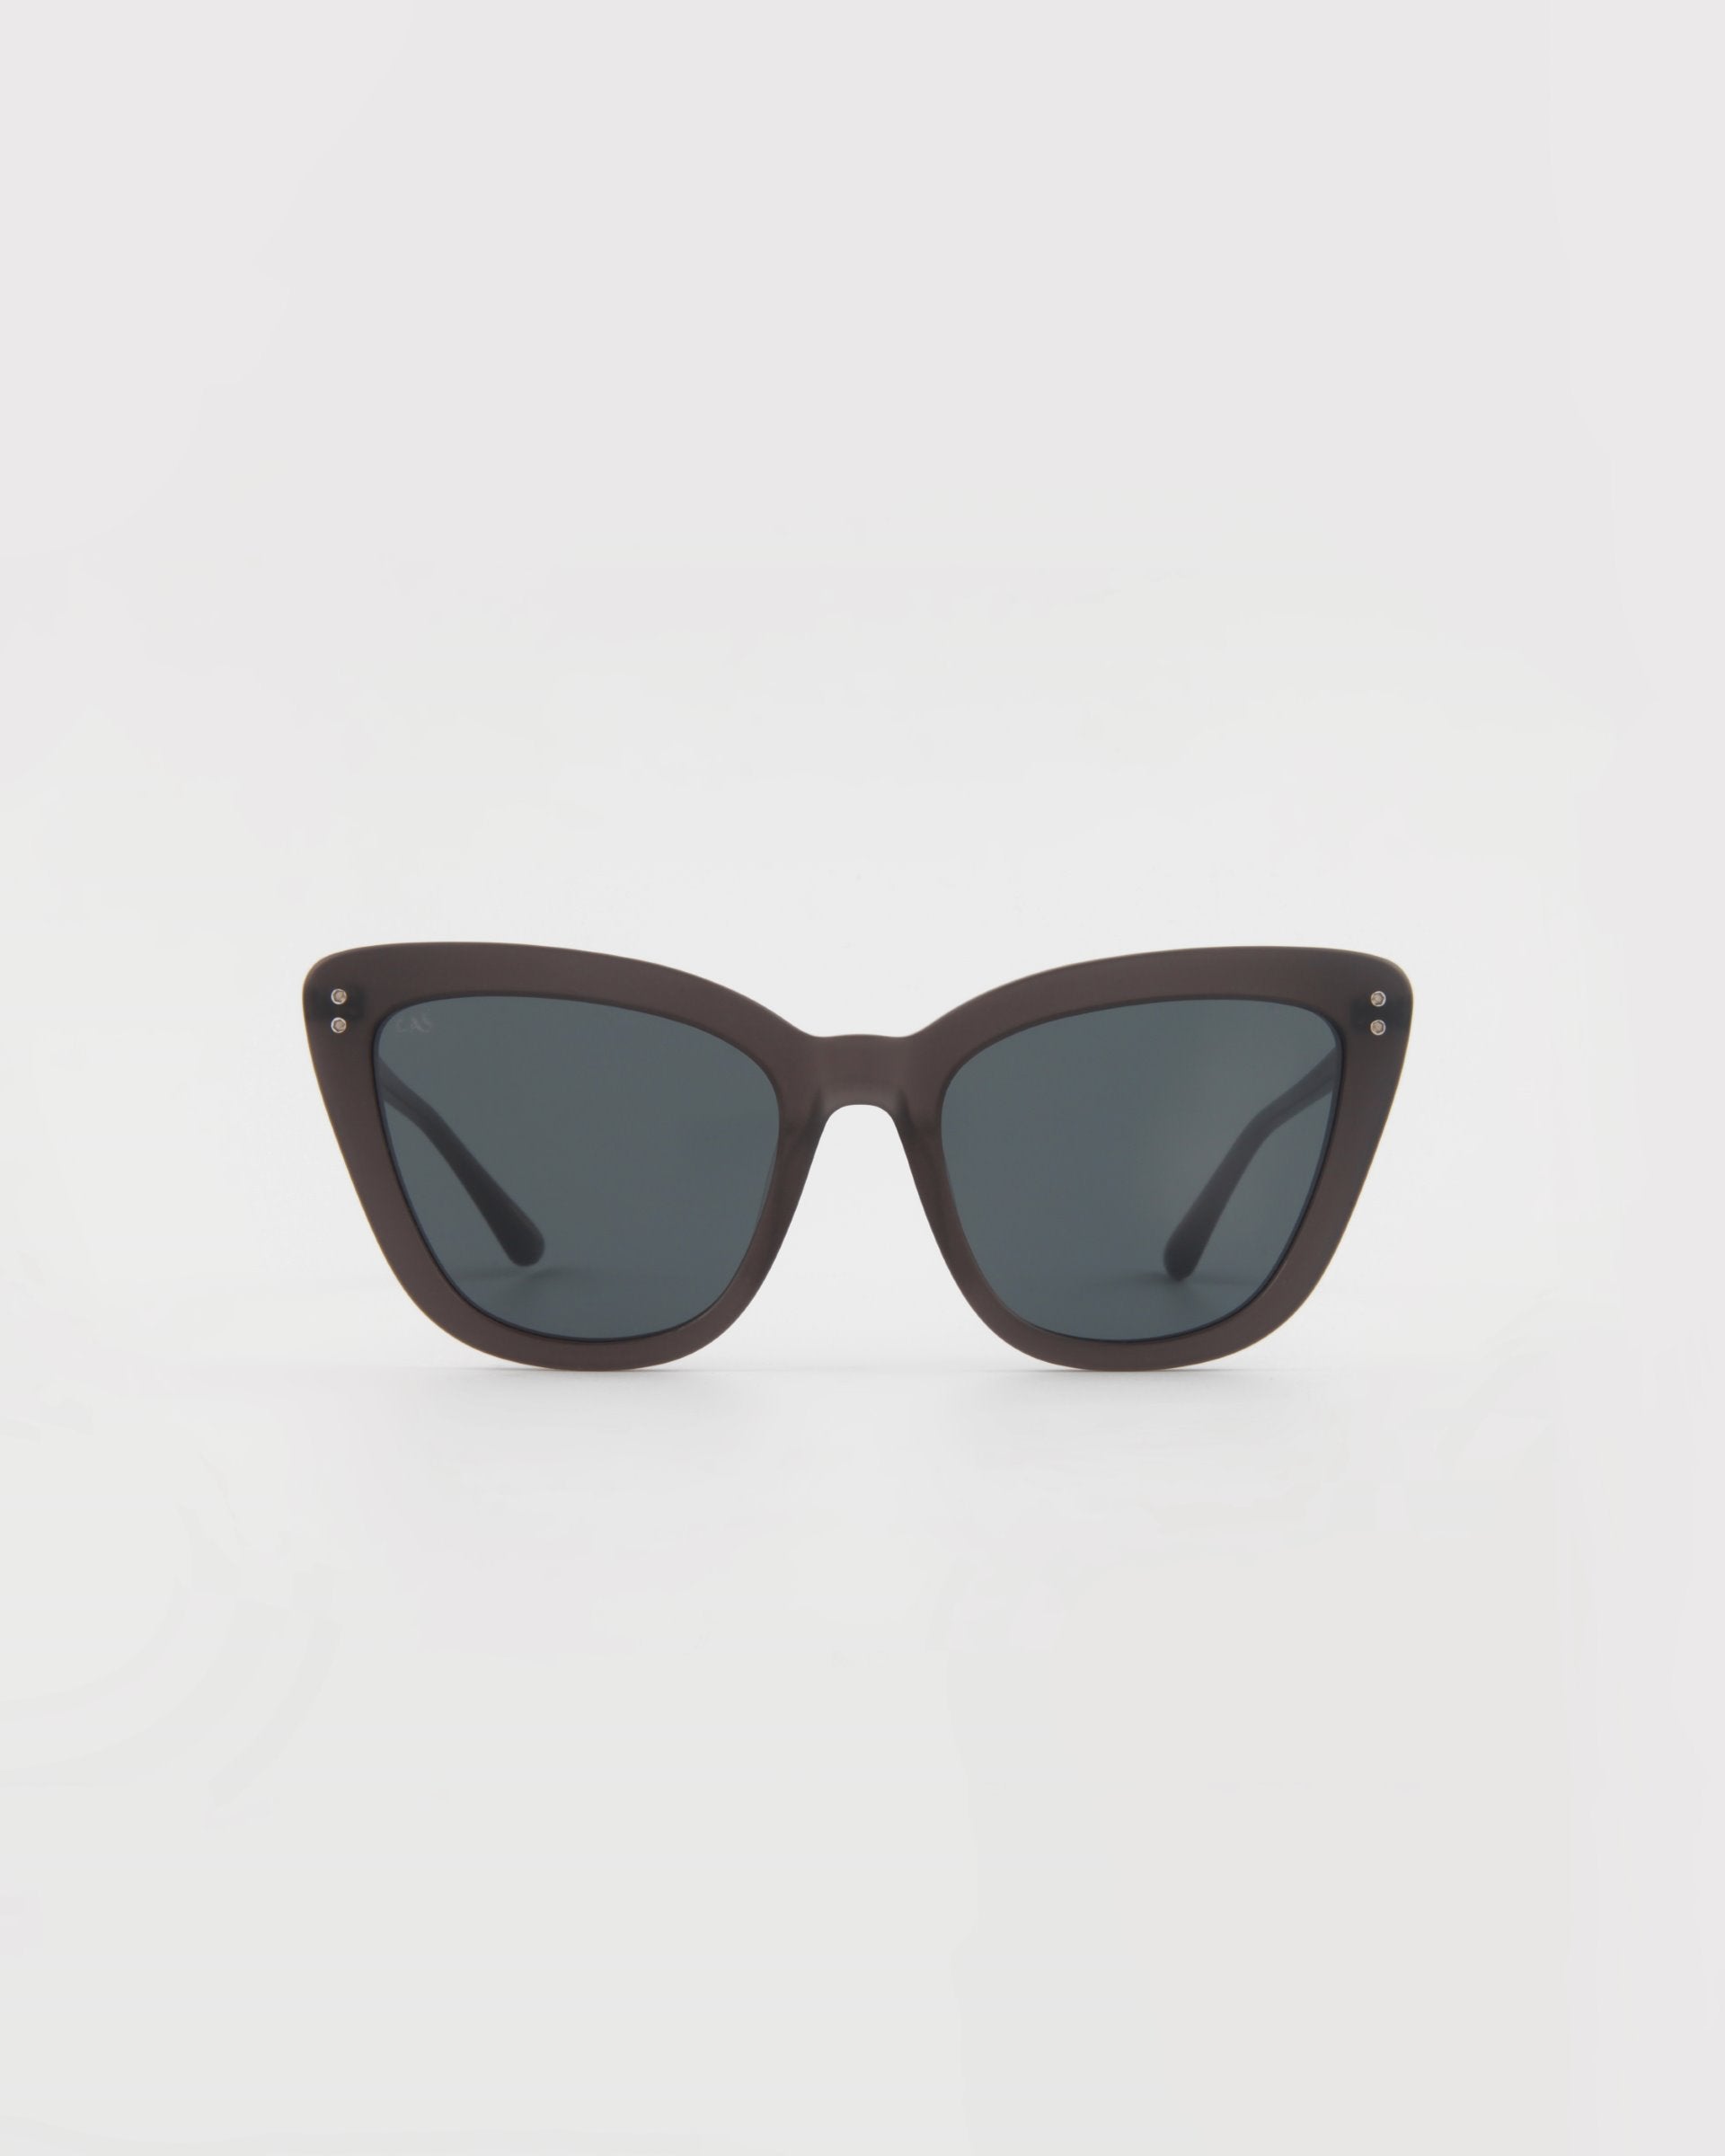 A pair of black For Art's Sake® Ice Cream sunglasses with dark tinted lenses, viewed from the front. The sunglasses have a sleek, matte finish with small metal stud details near the hinges on the corners of the frames. Handmade acetate cat-eye frames ensure both style and quality, set against a plain white background.